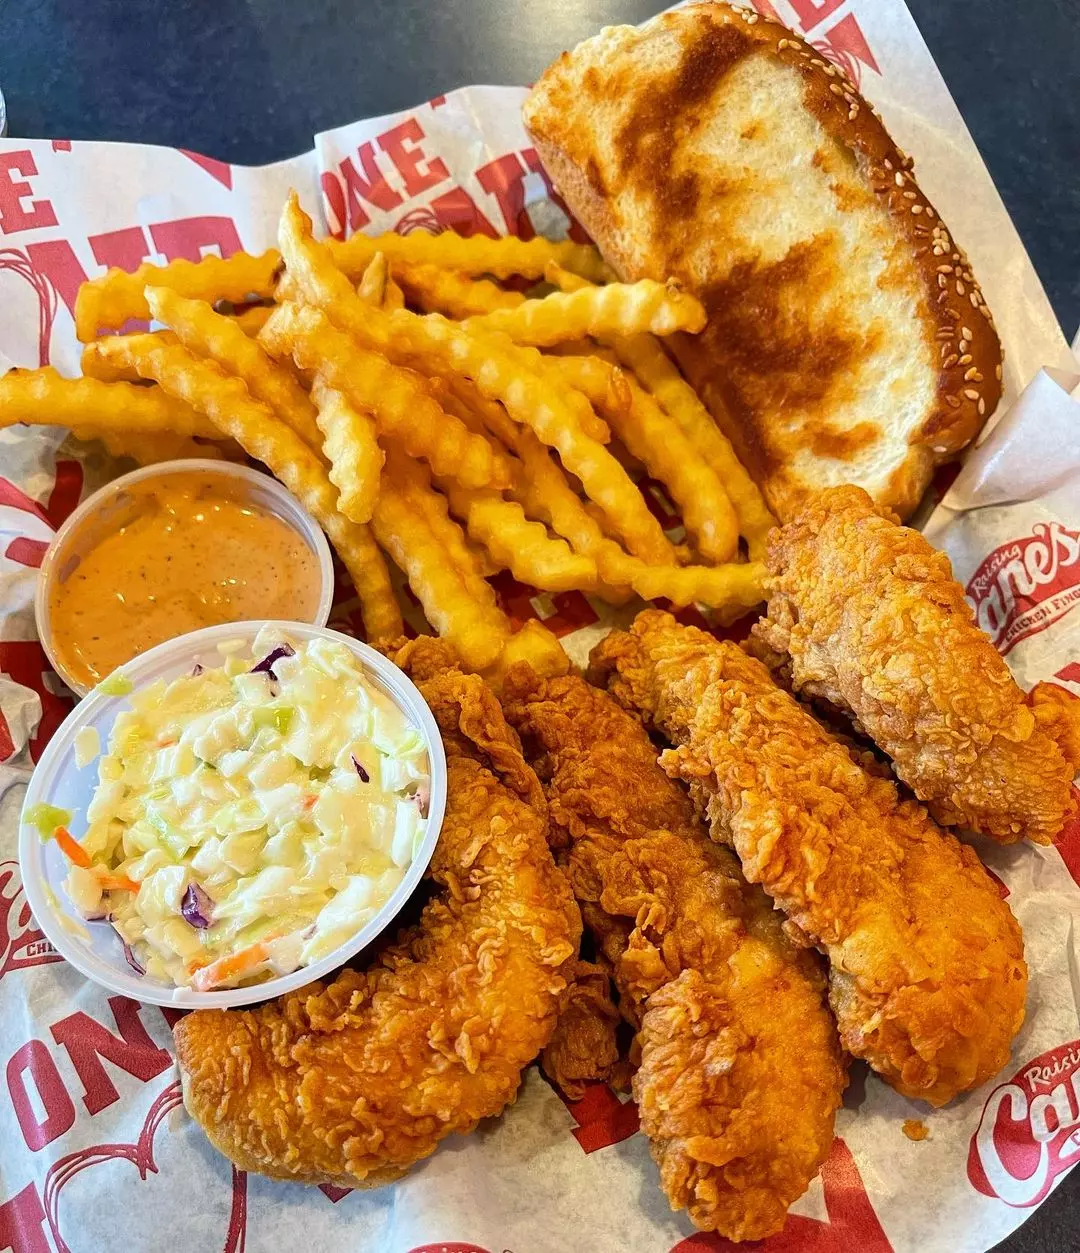 Raising Cane's is Overrated – Nix News